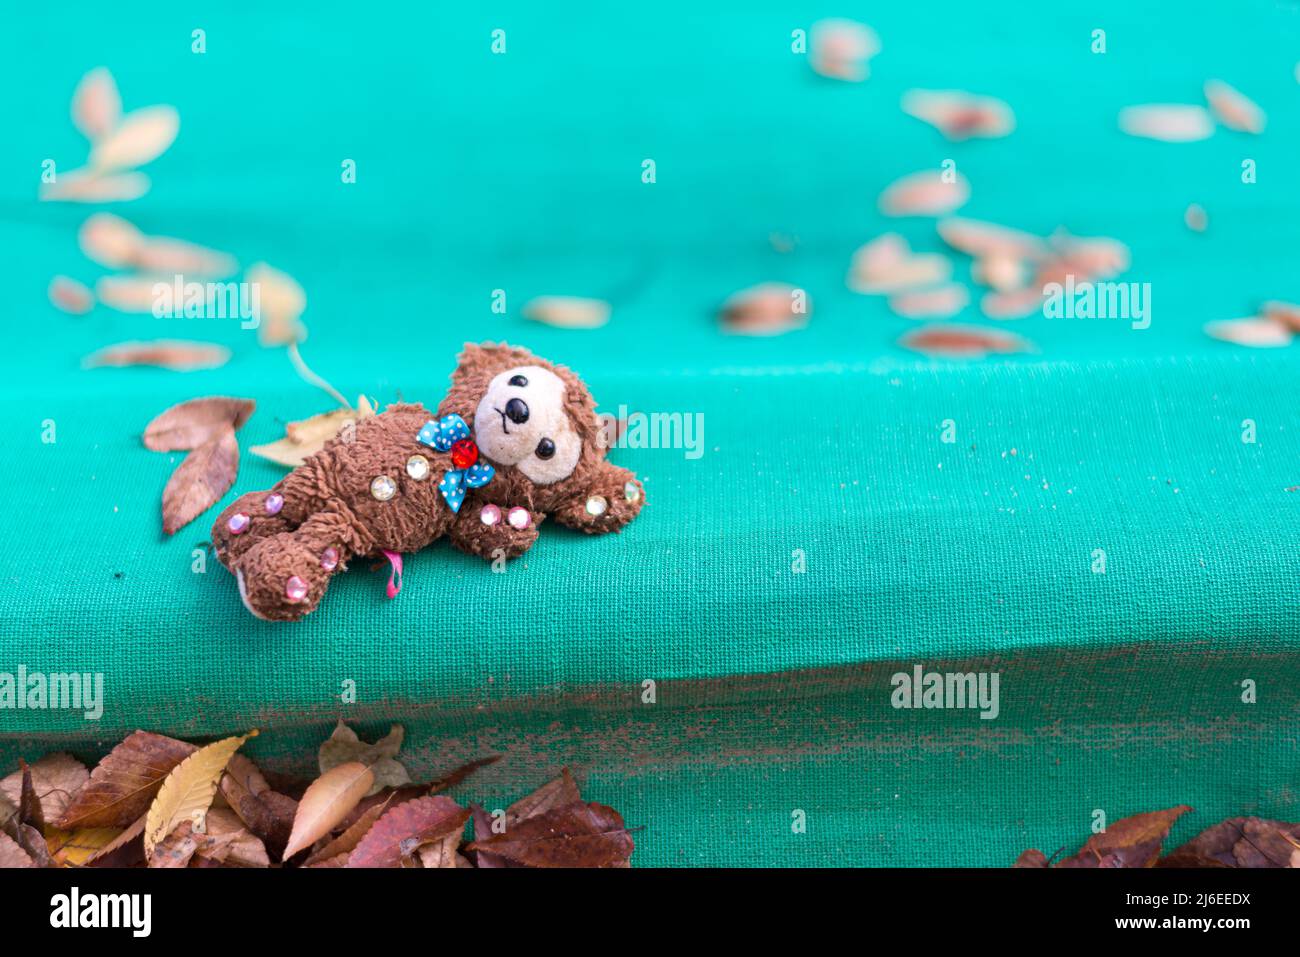 Abandoned stuffed animal lying on a green sandbox cover in a park. Fallen leaves. Stock Photo